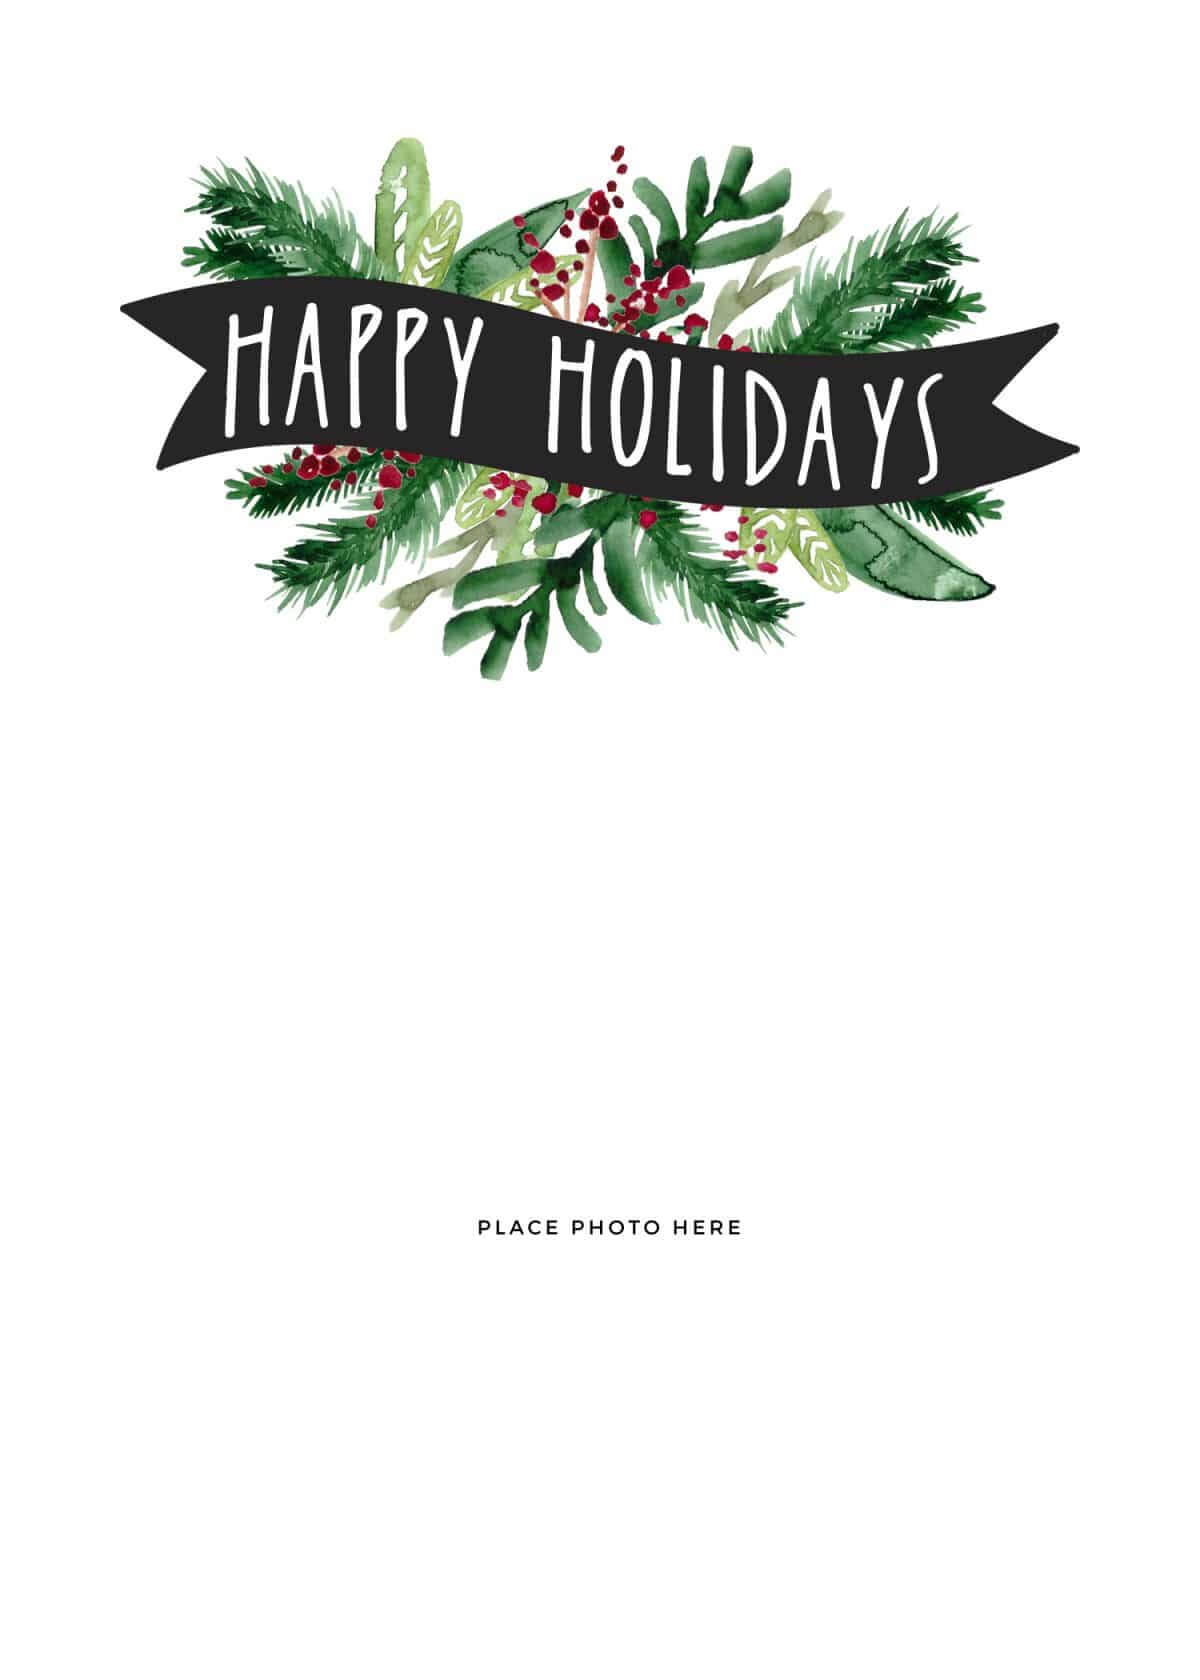 27 Free Christmas Card Template For Photos In Photoshop Regarding Printable Holiday Card Templates